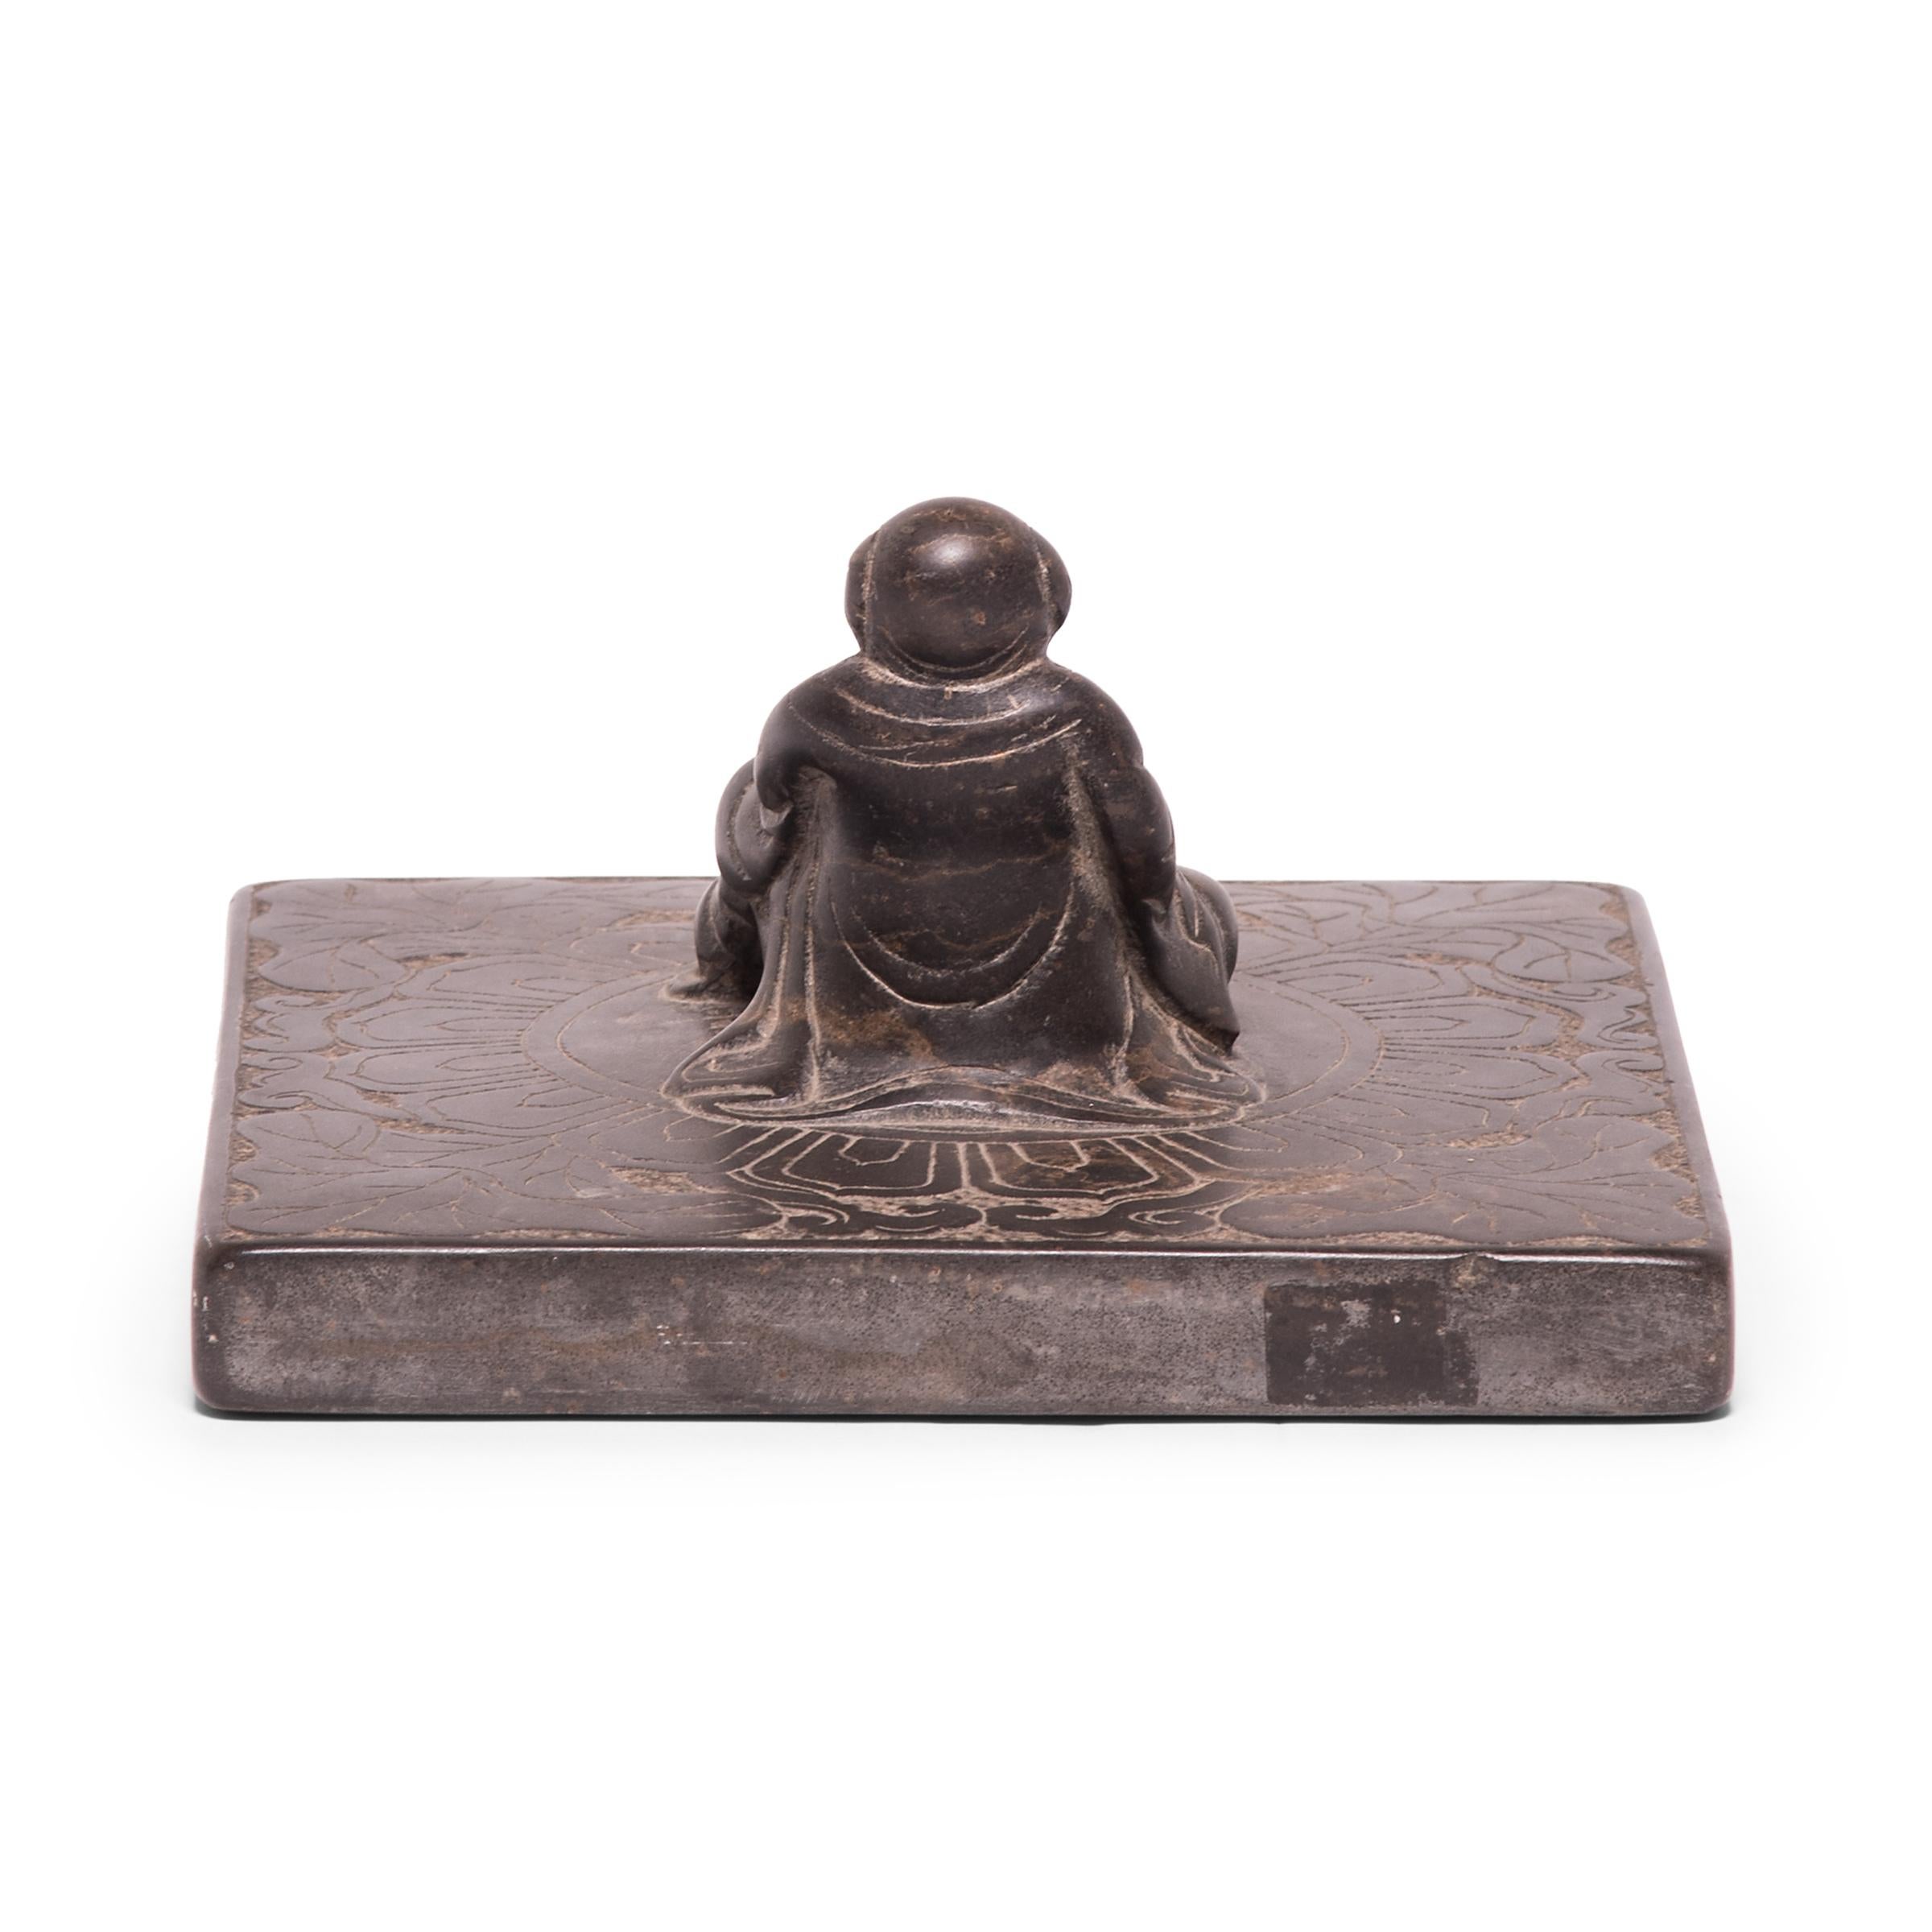 Hand-Carved Chinese Stone Shoemaker's Weight with Zhu Bajie, c. 1850 For Sale